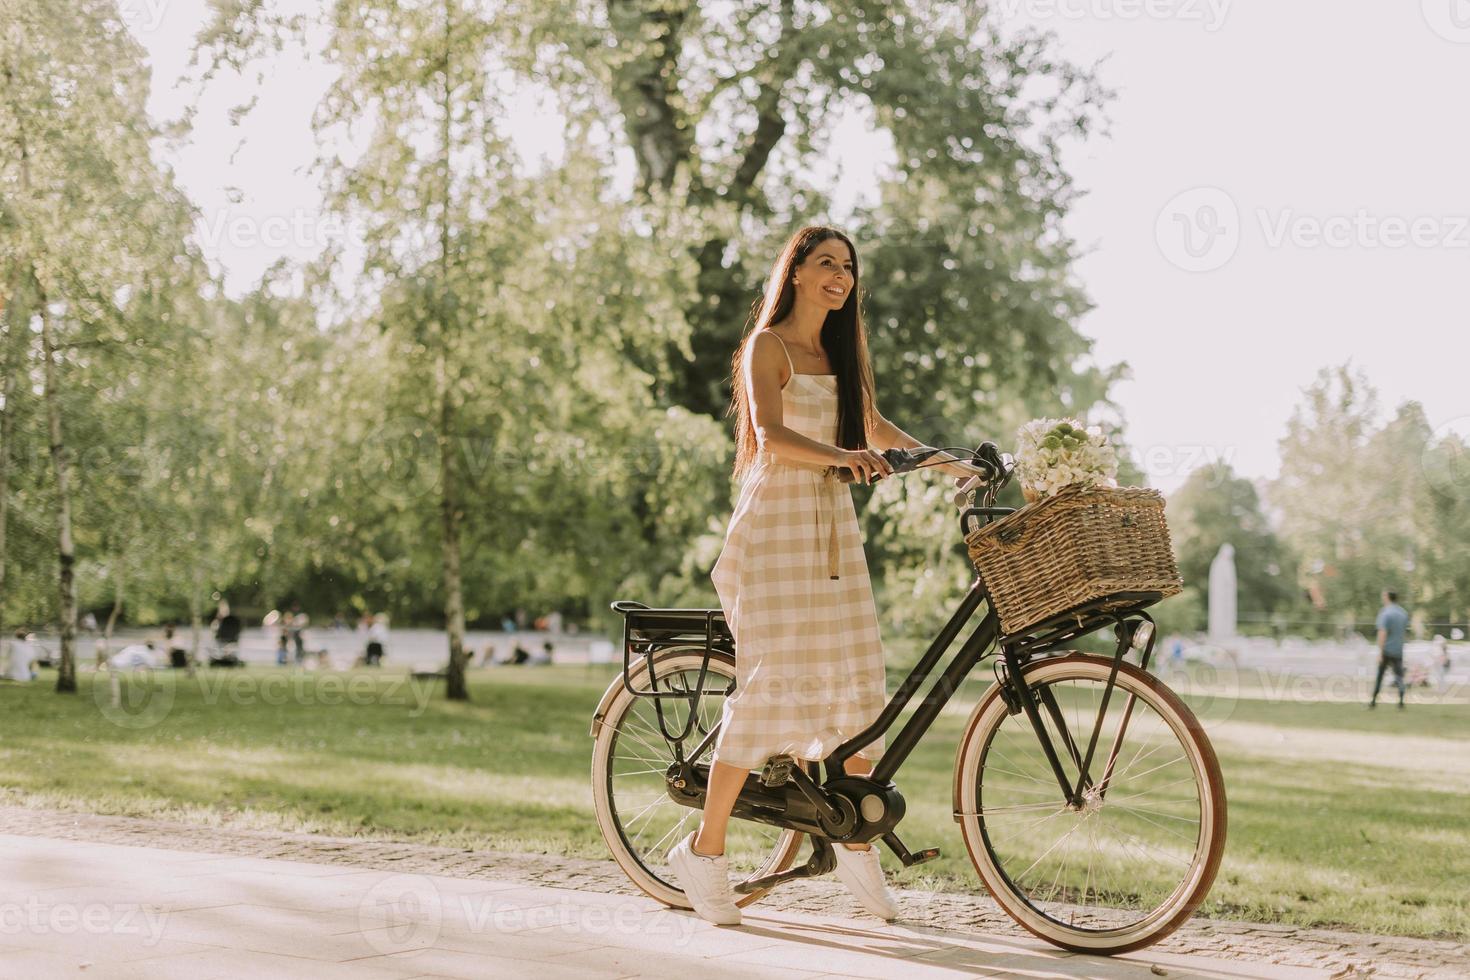 Young woman with electric bike and flowers in the basket photo